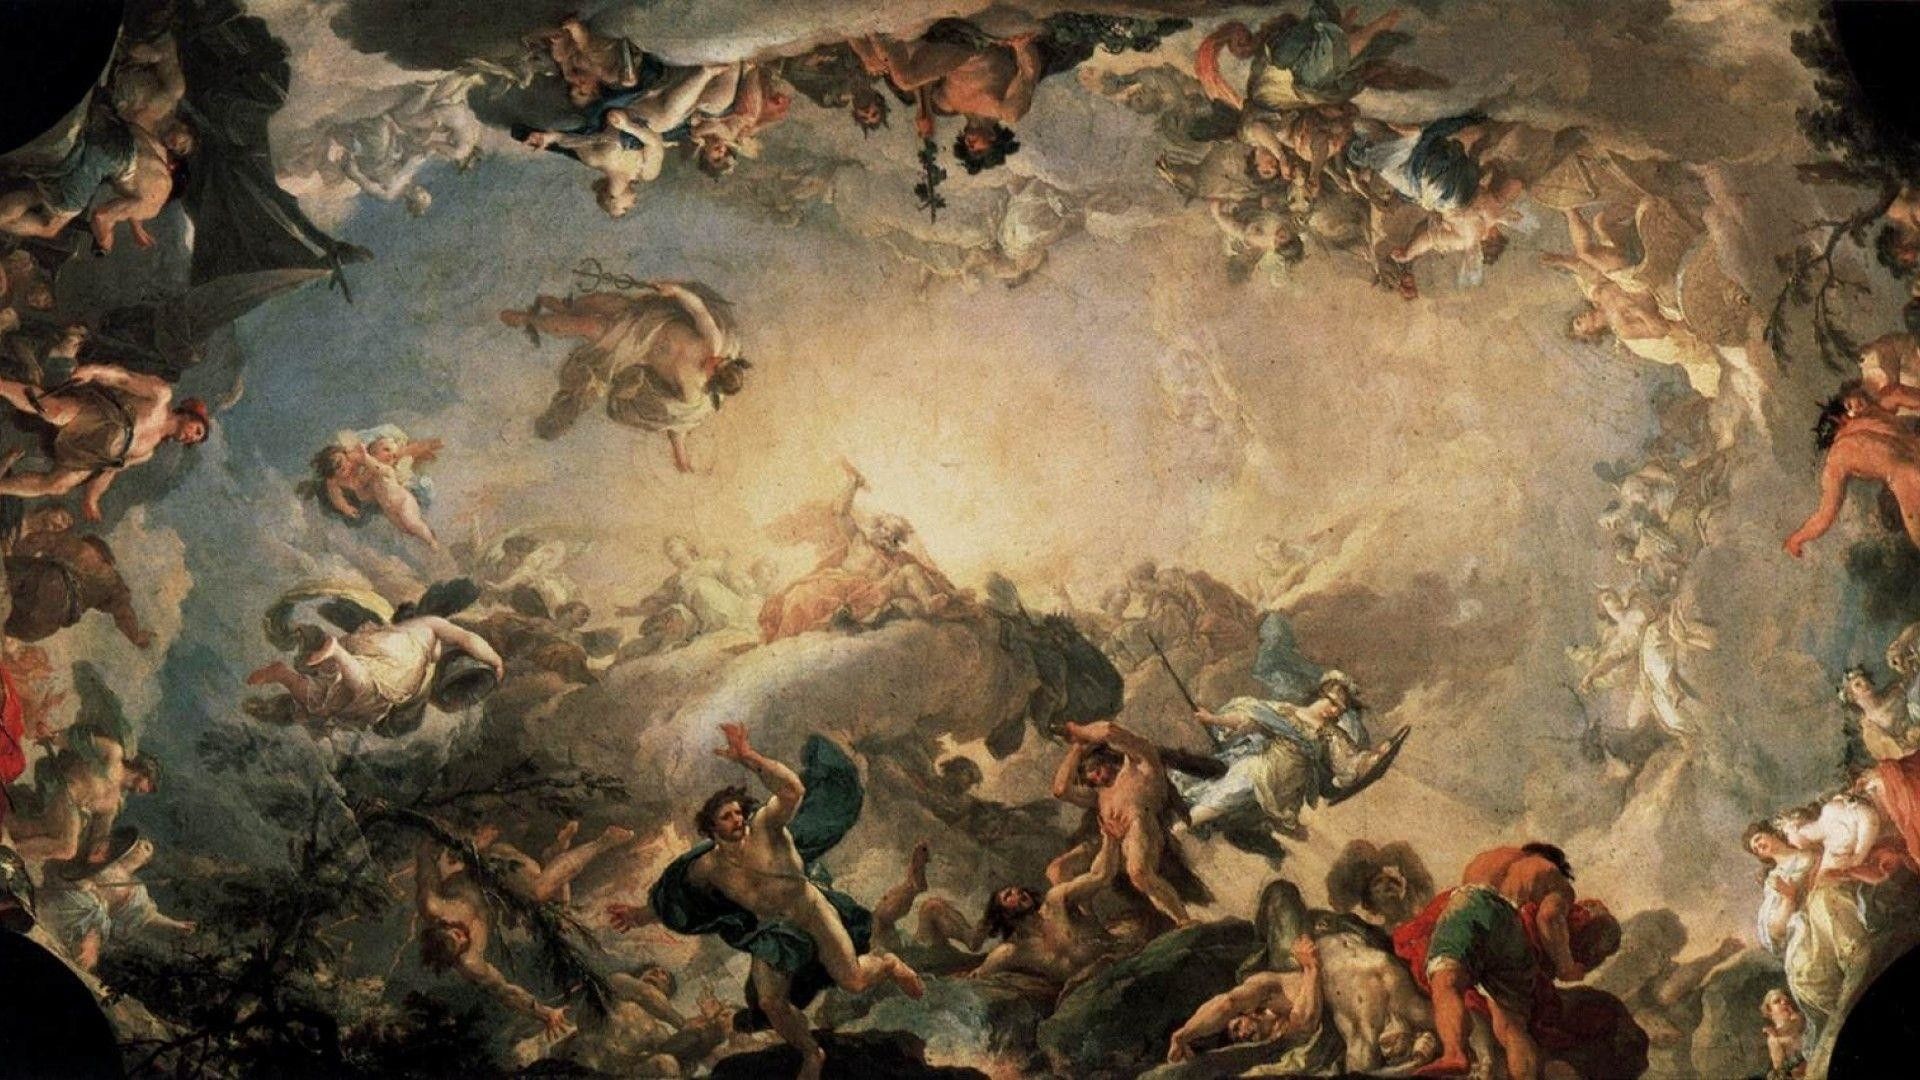 A painting of people in the sky - Greek mythology